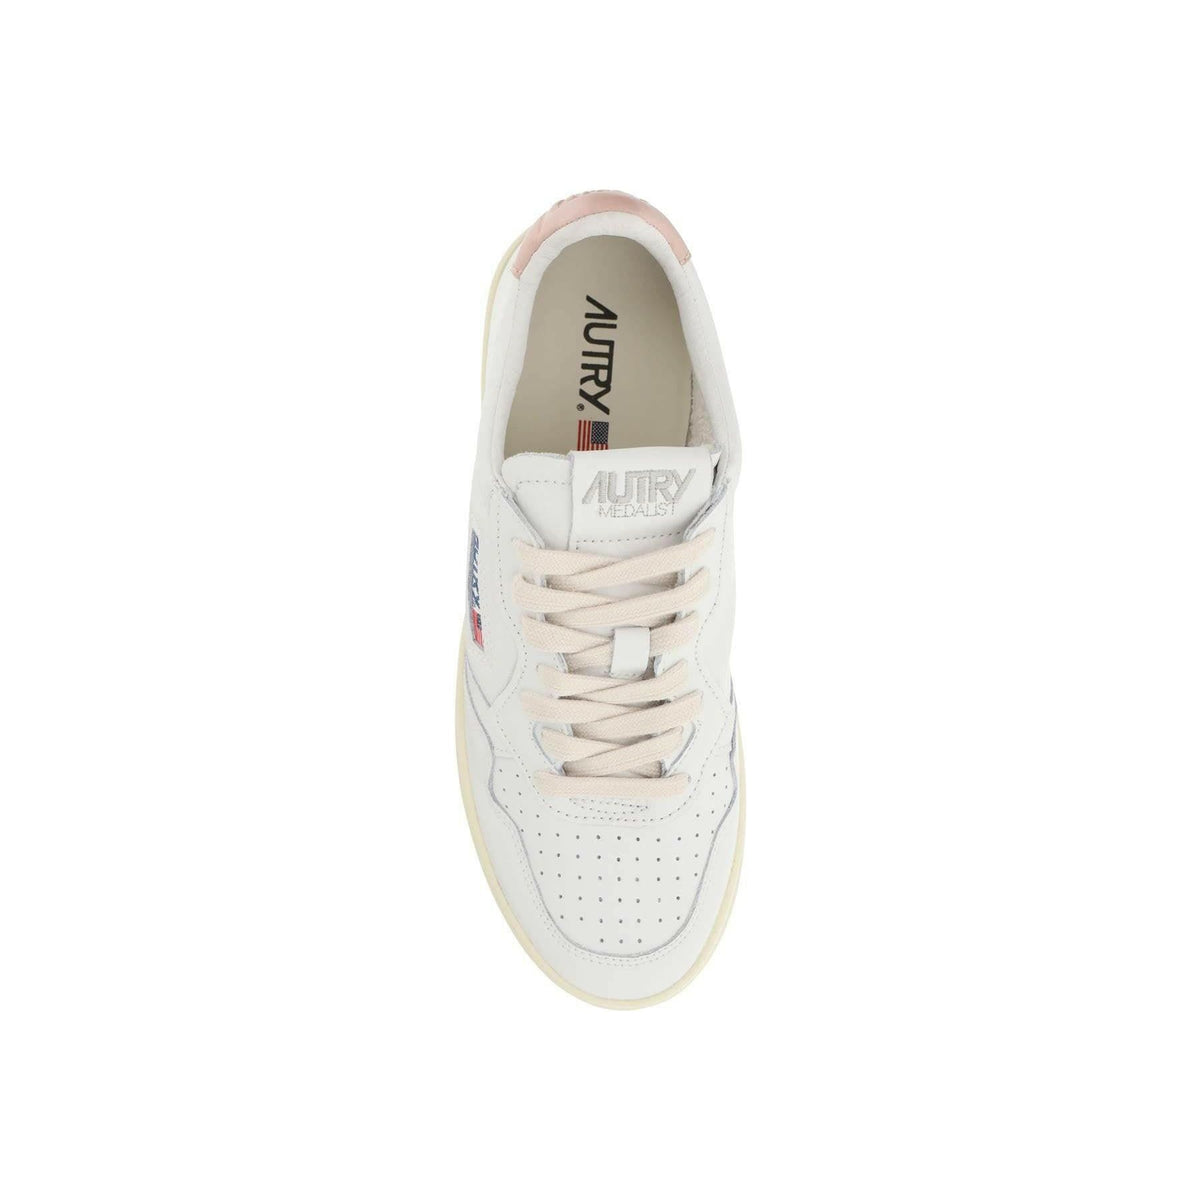 AUTRY - White and Pink Leather Medalist Low Sneakers - JOHN JULIA